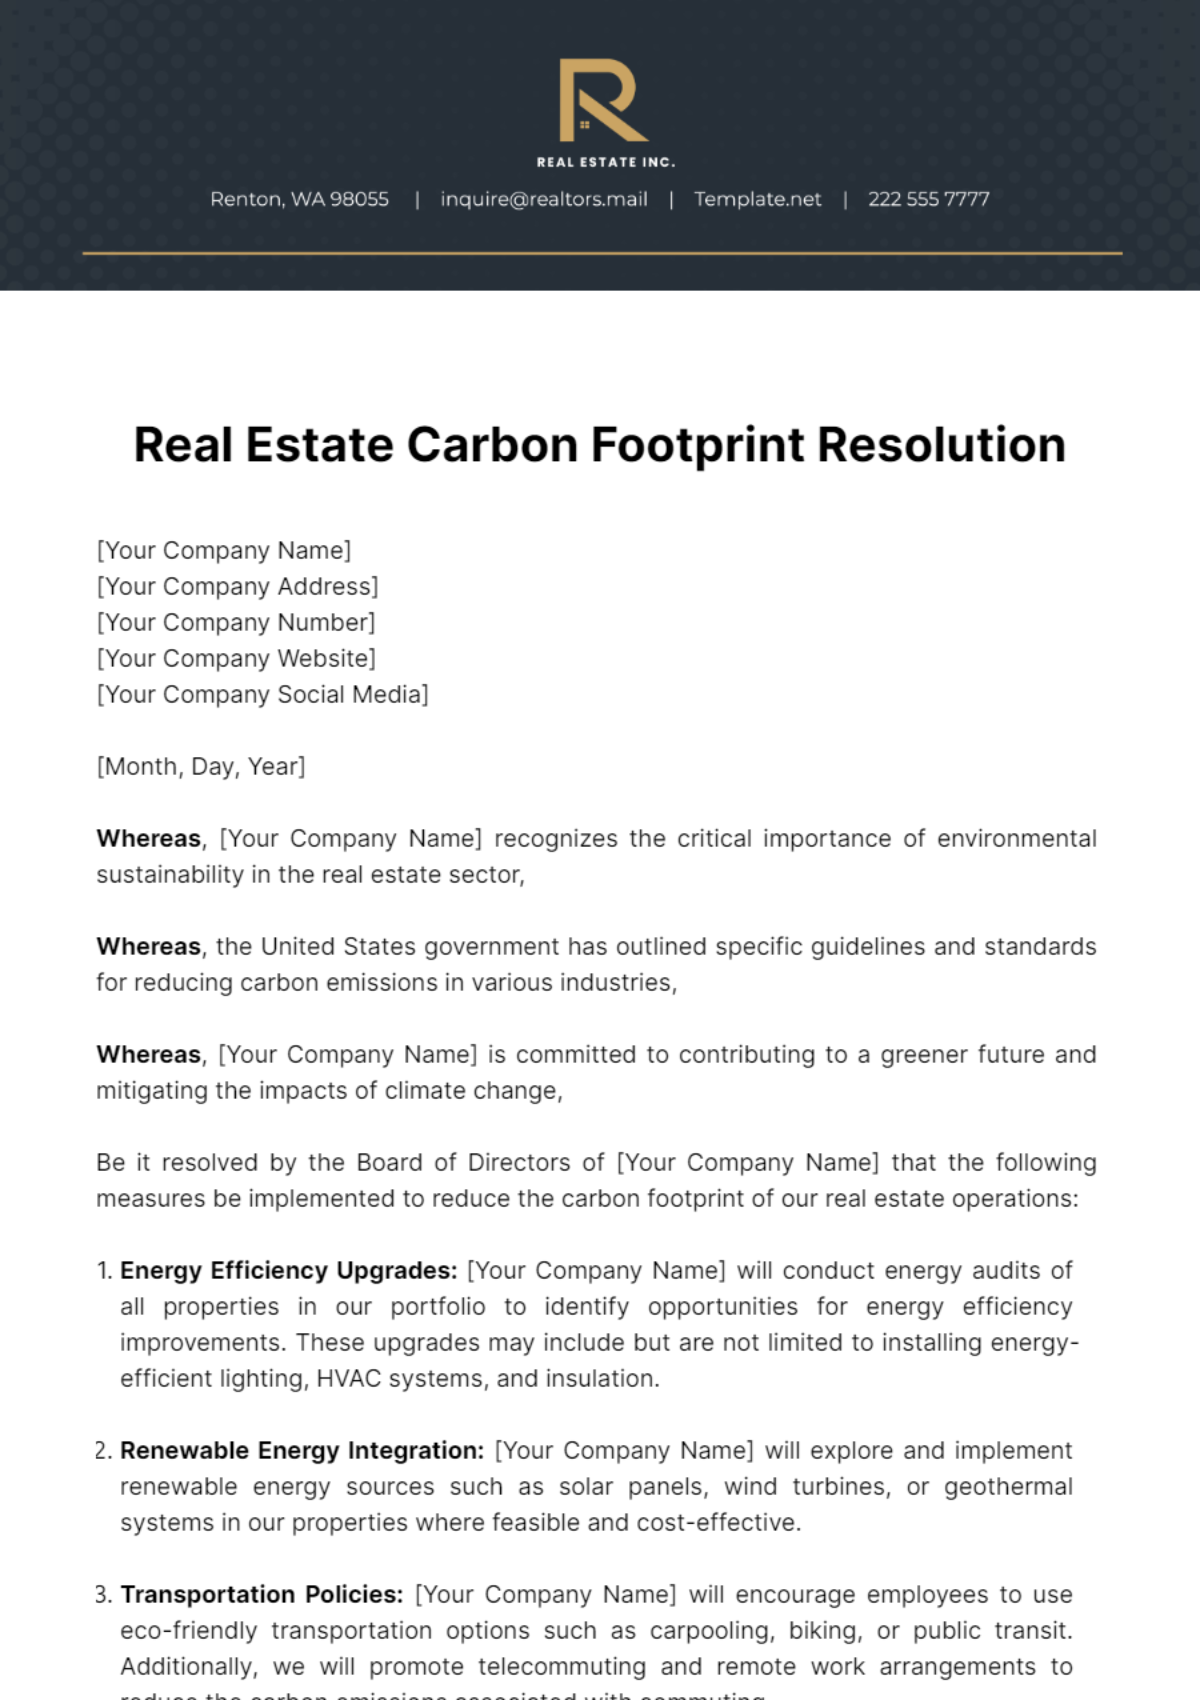 Real Estate Carbon Footprint Resolution Template